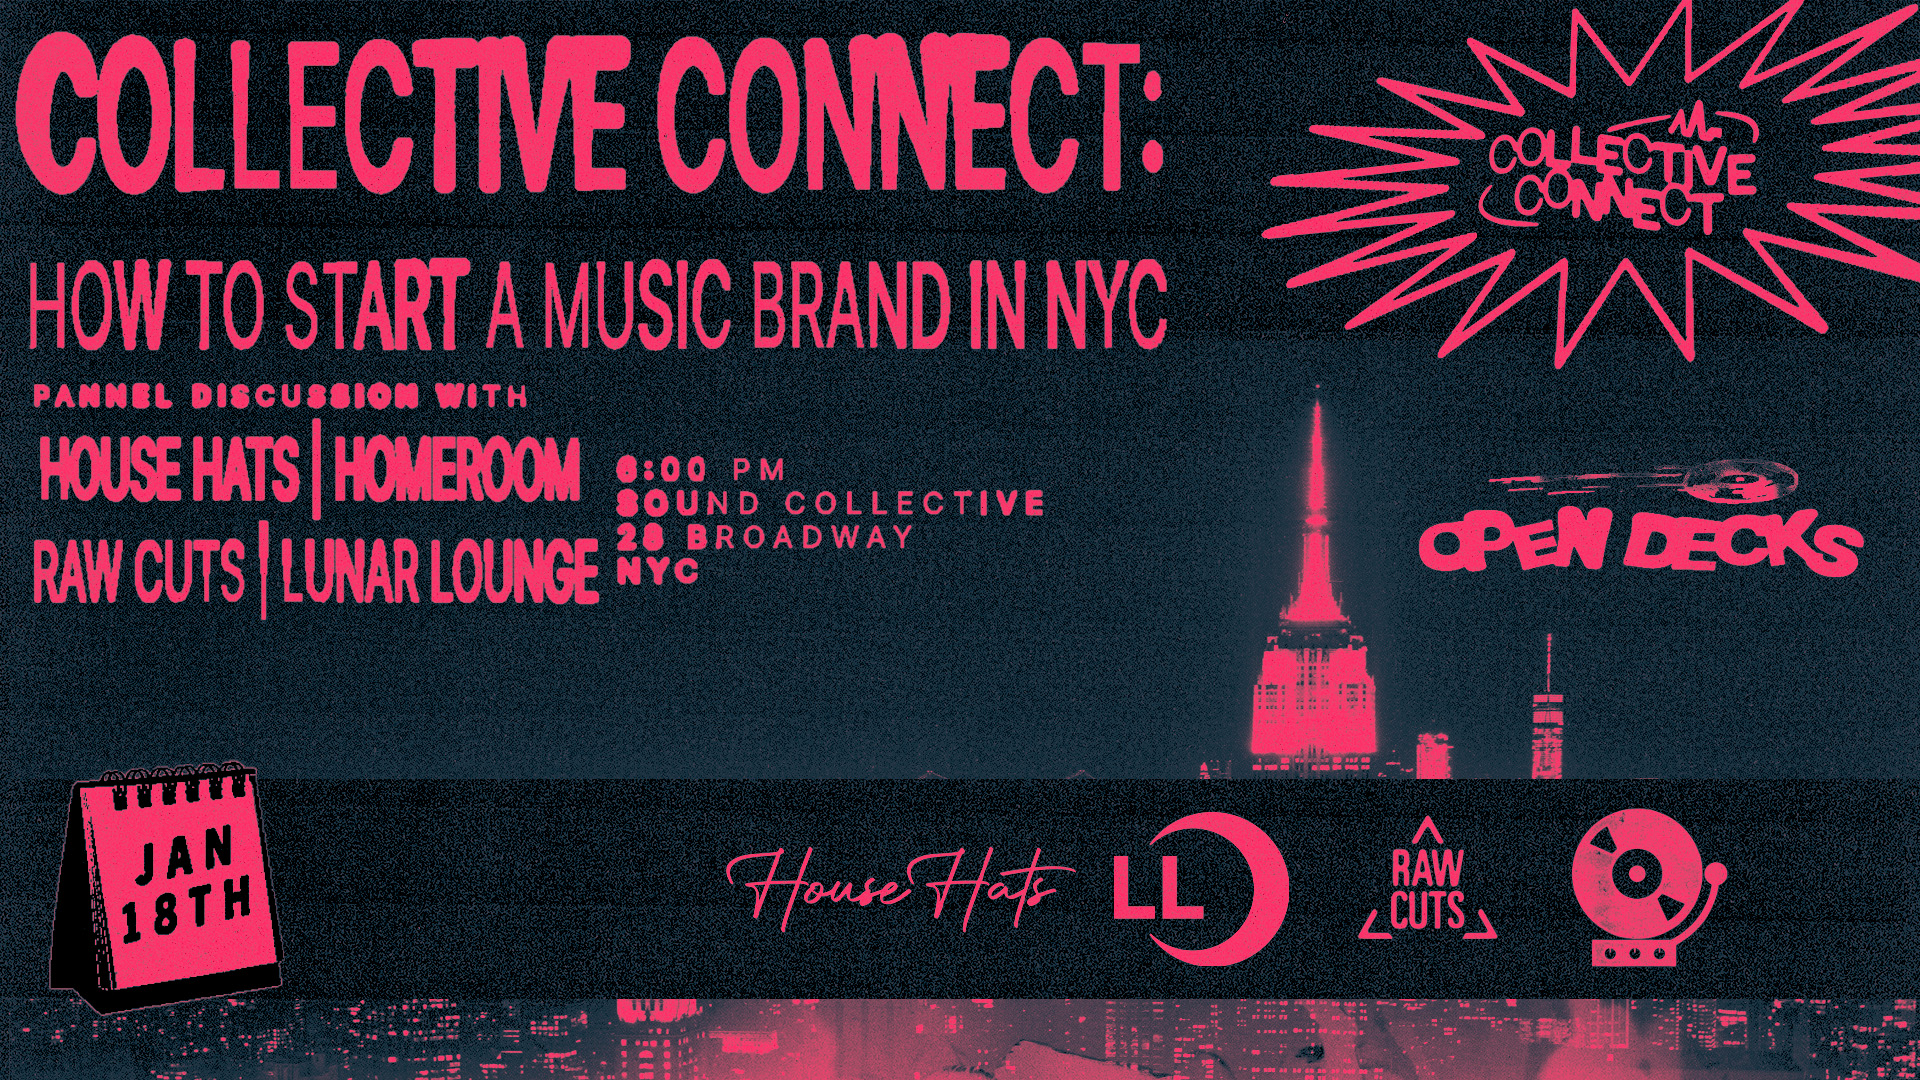 Collective Connect: How to Start a Music Brand in NYC